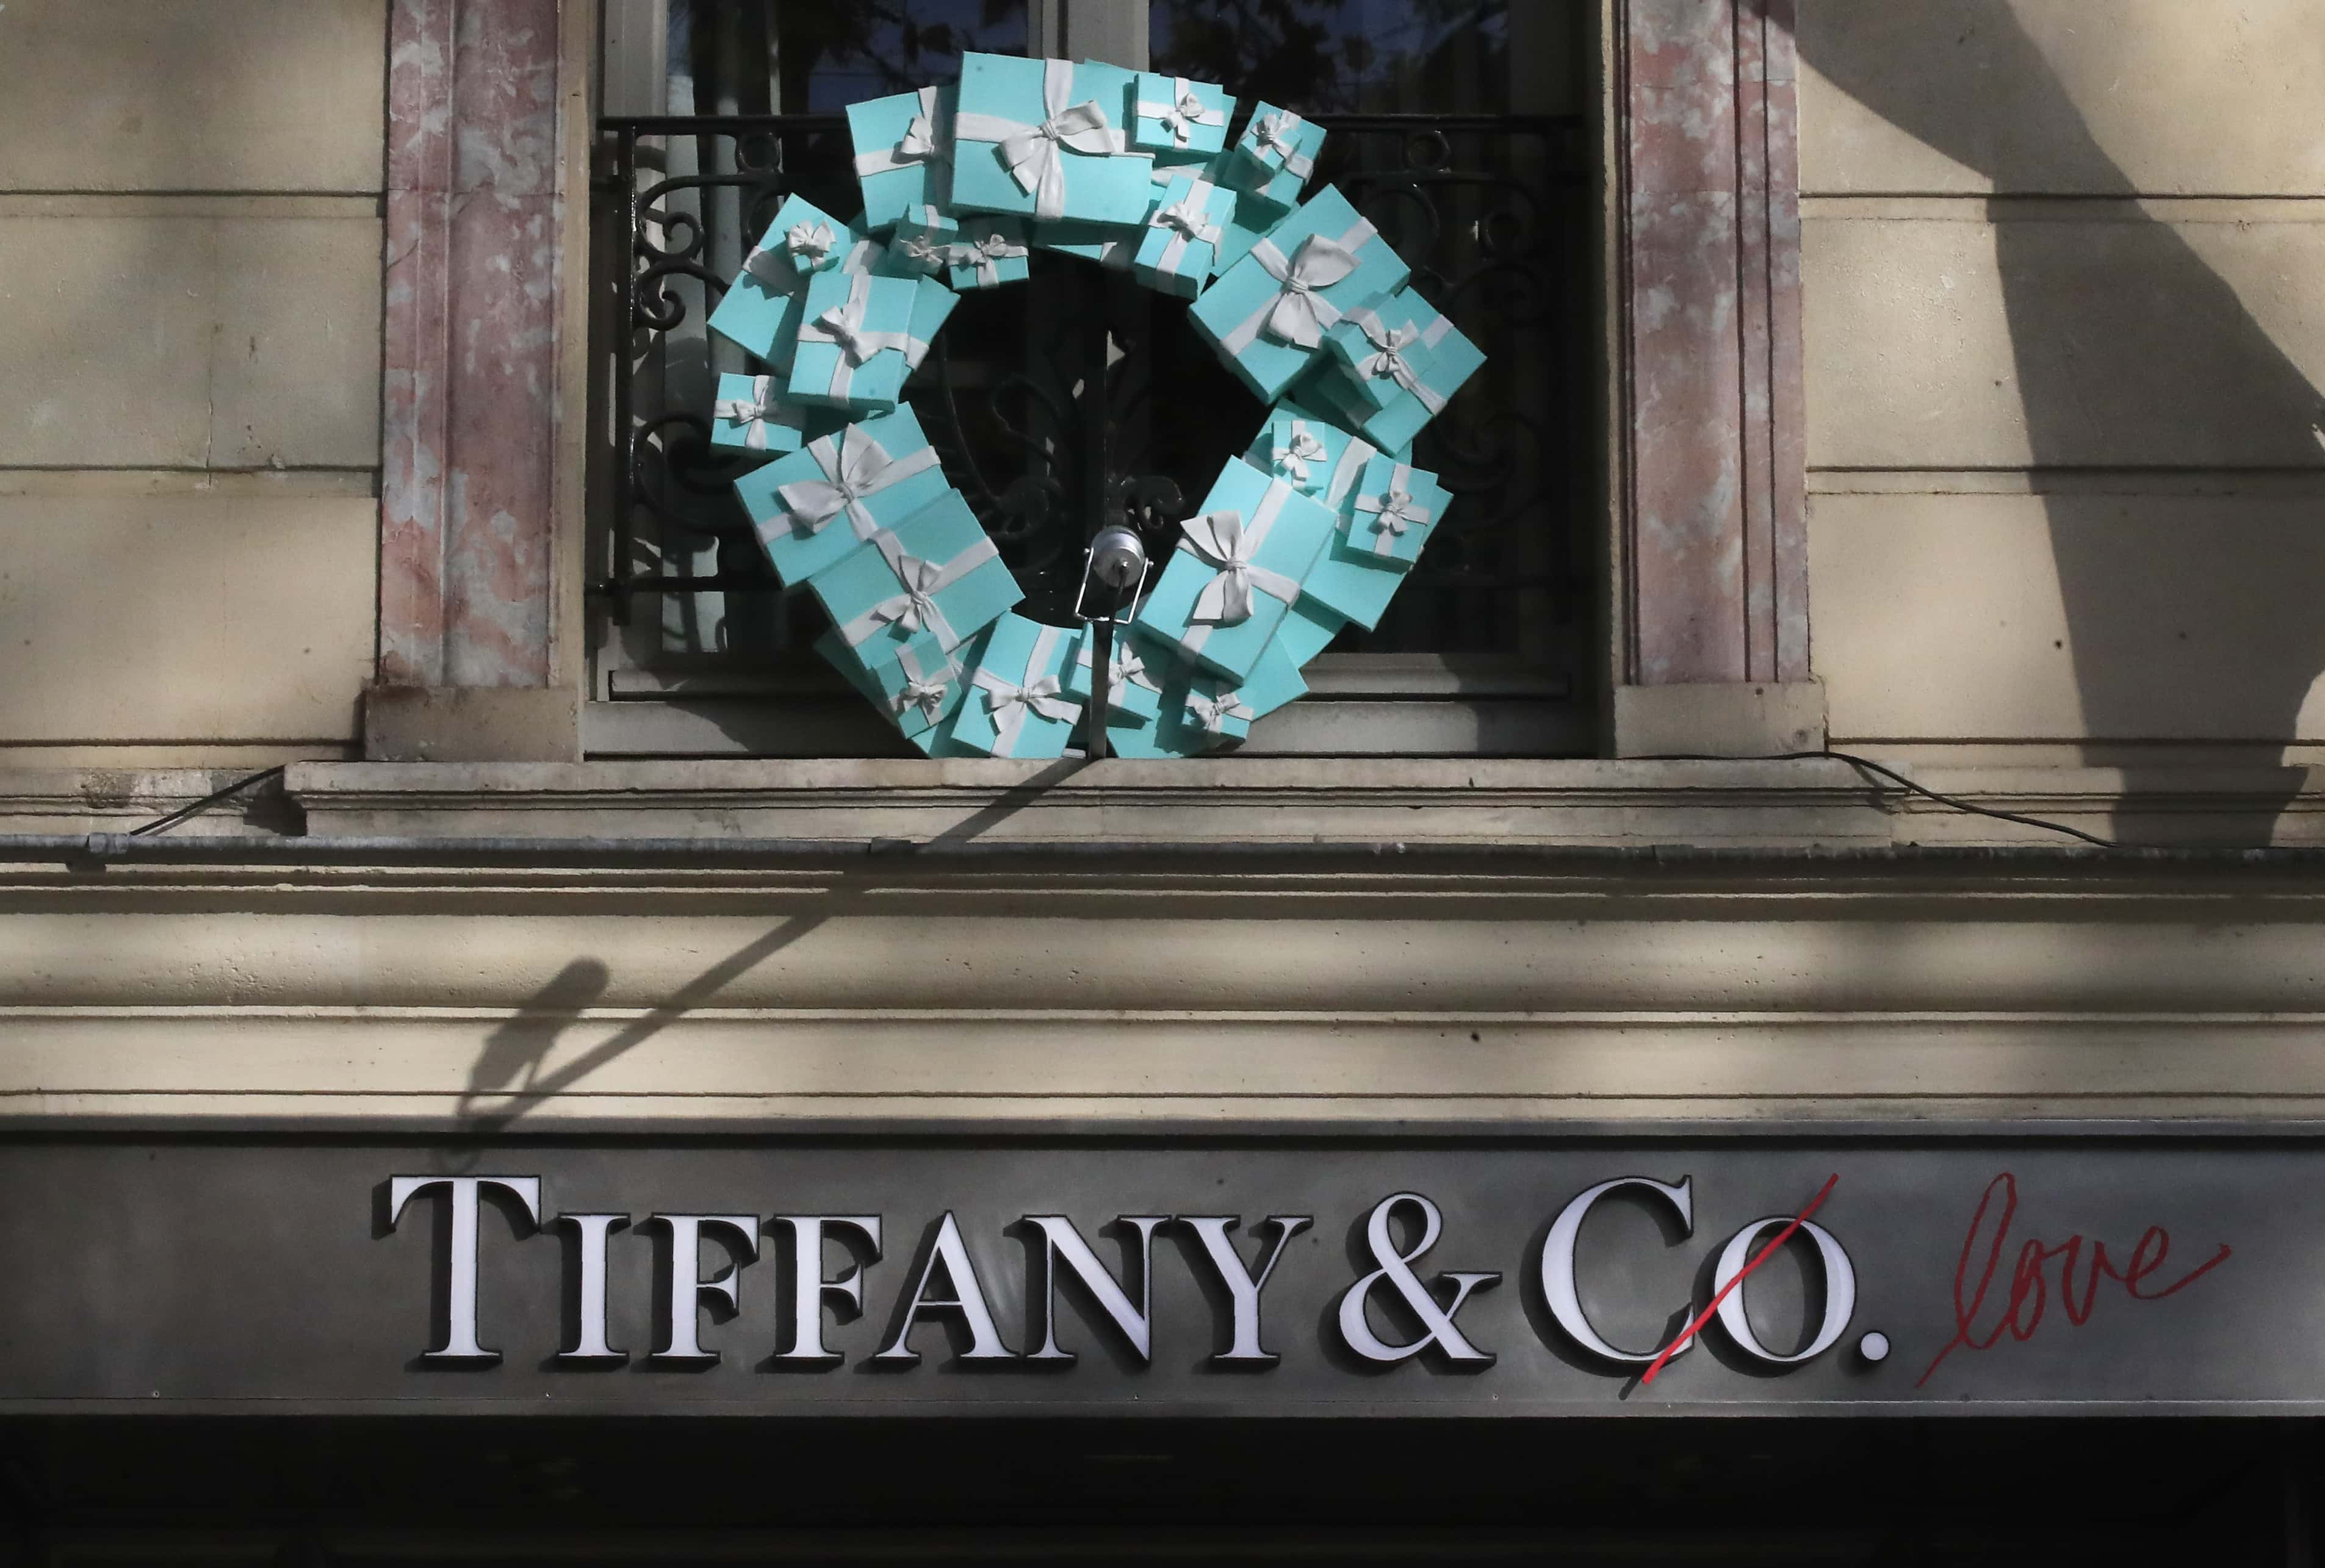 Louis Vuitton owner LVMH to buy Tiffany for $16bn, Luxury goods sector